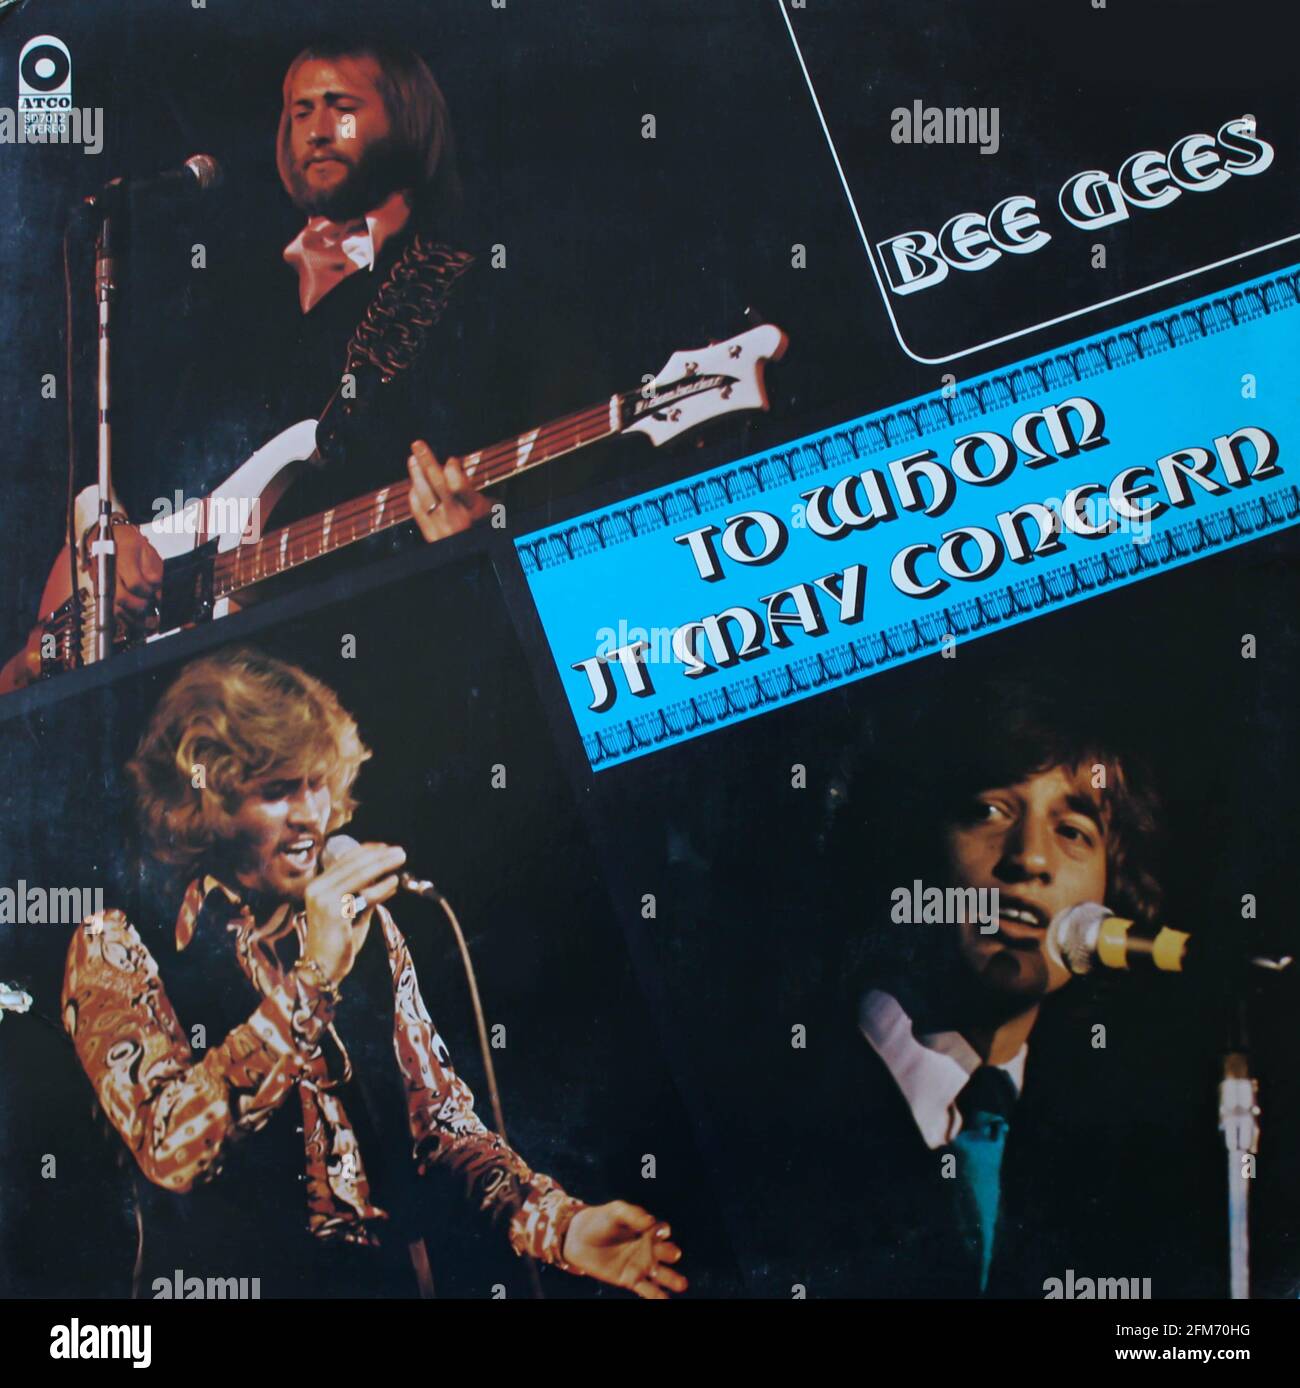 Disco and soul artists, the Bee Gees music album on vinyl record LP disc. Titled:  To Whom It May Concern, album cover Stock Photo